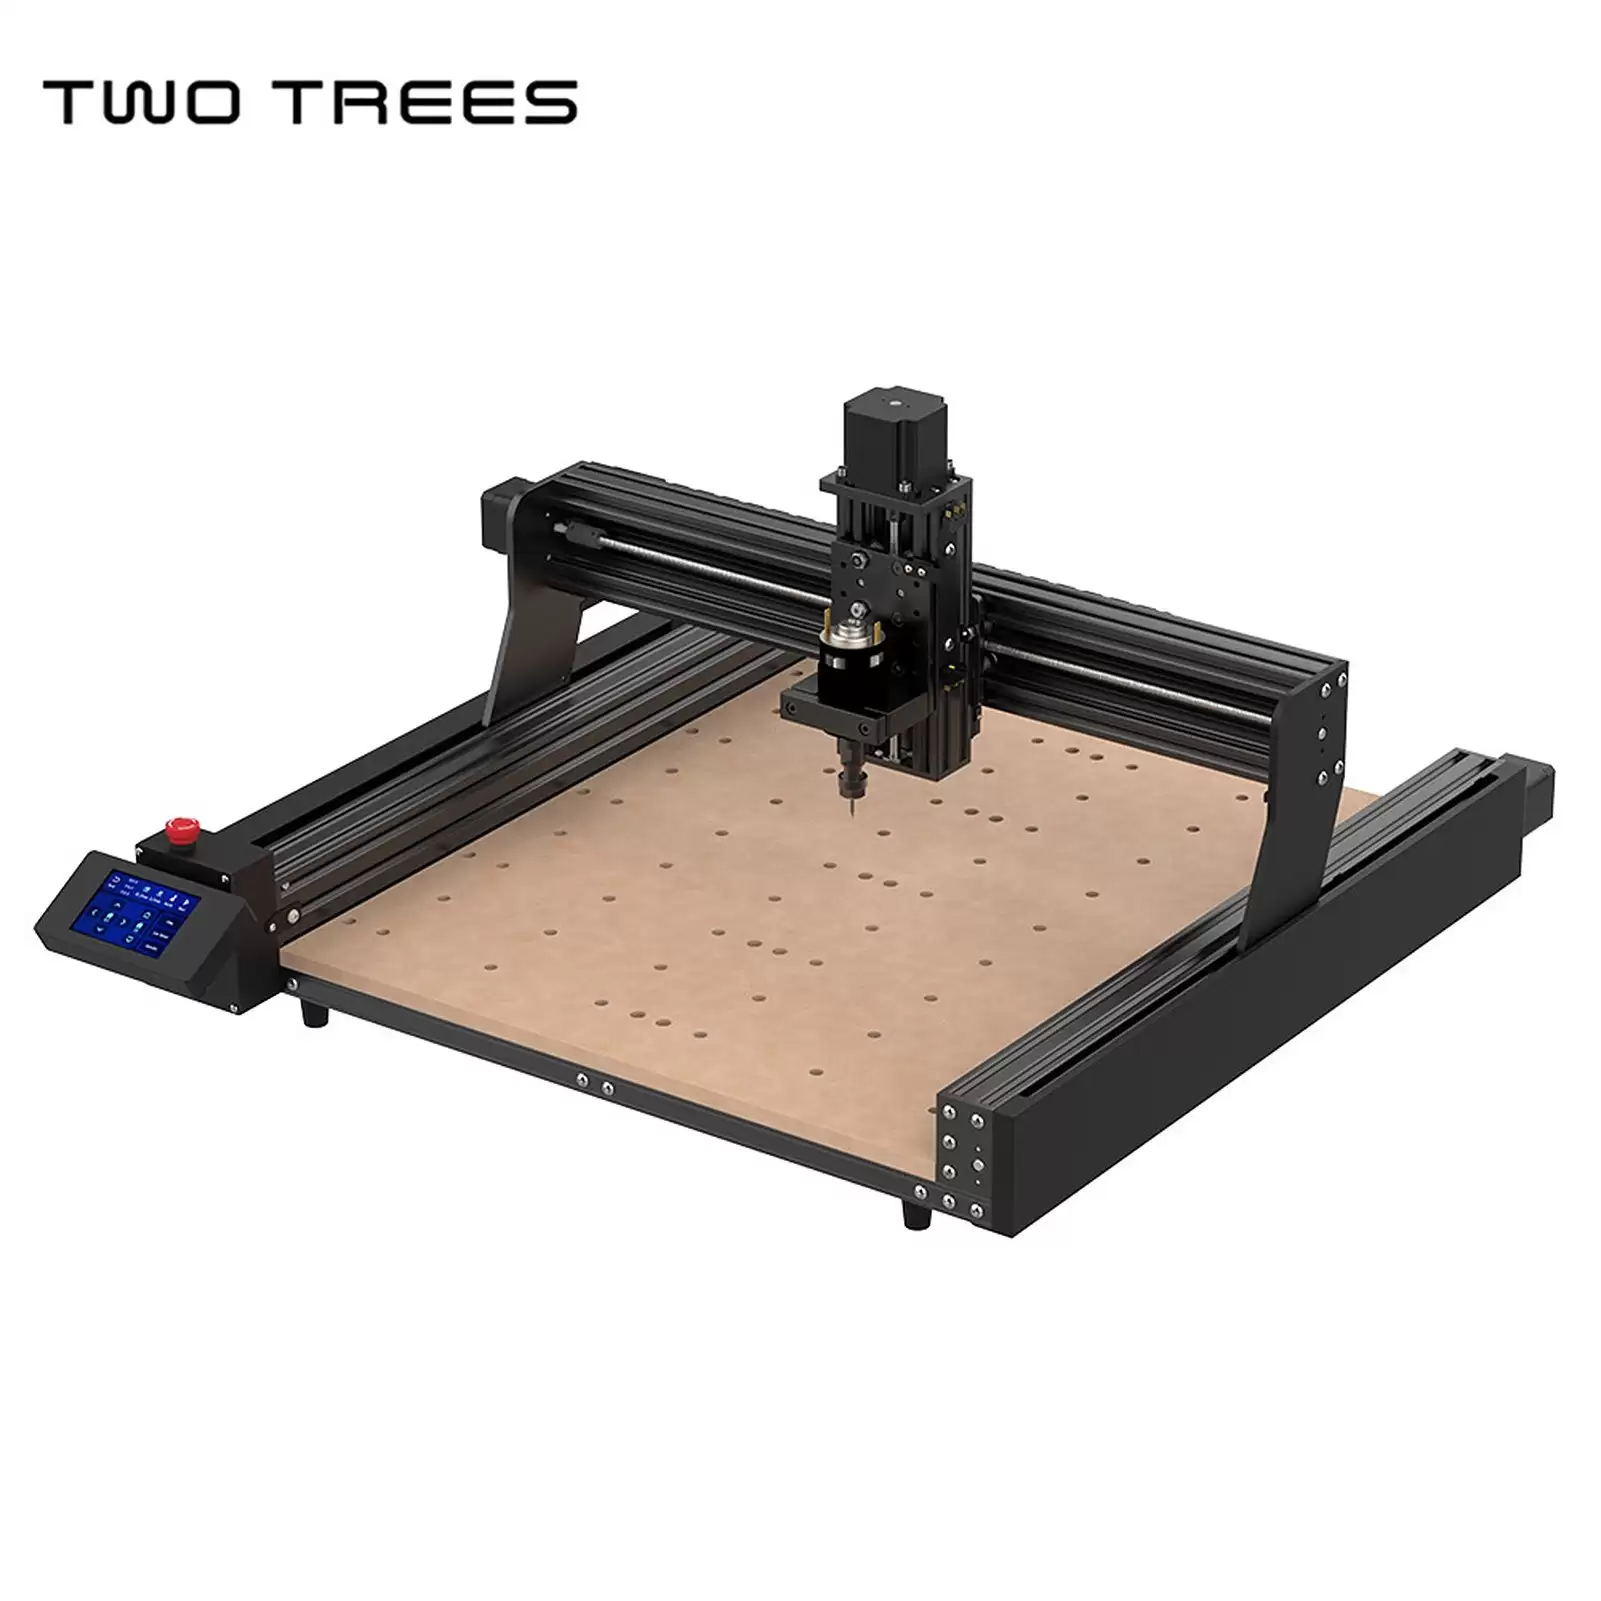 Pay Only $ 379.99 Two Trees Ttc 450 Cnc Engraver ,Free Shipping With This Cafago Discount Voucher